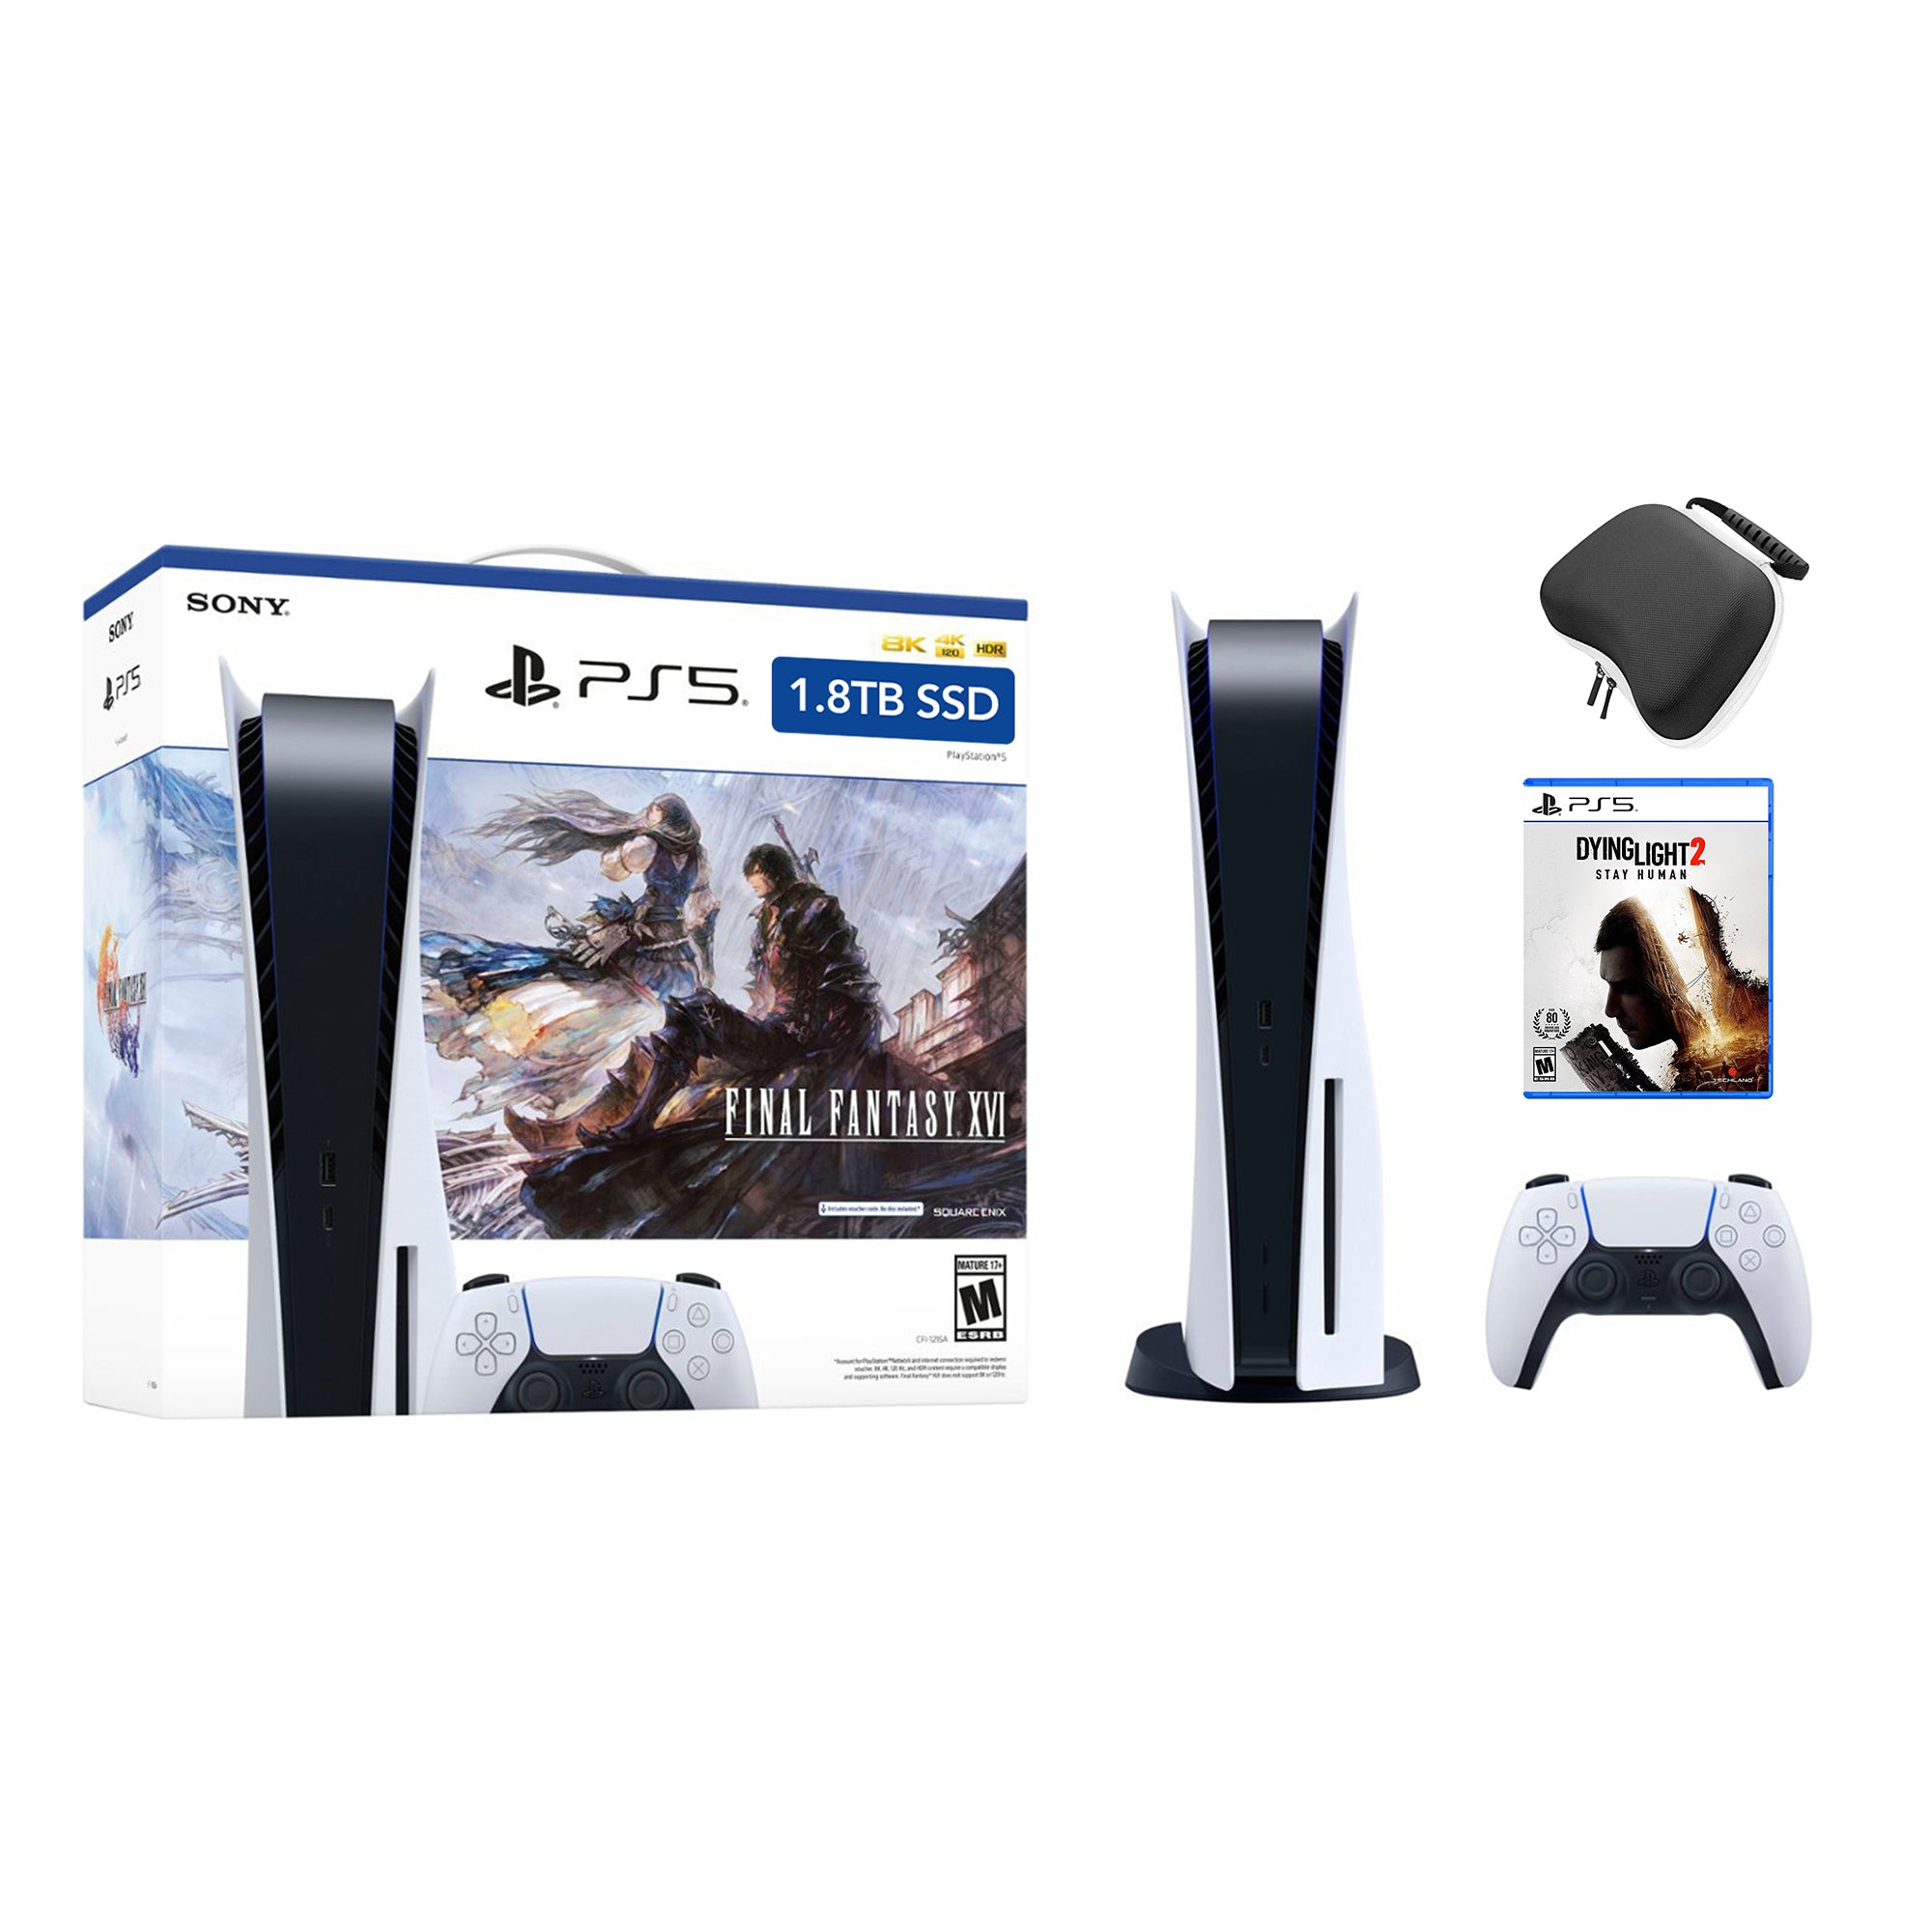 PlayStation 5 Upgraded 1.8TB Disc Edition FINAL FANTASY XVI Bundle with Dying Light 2 Stay Human and Mytrix Controller Case - PS5, White